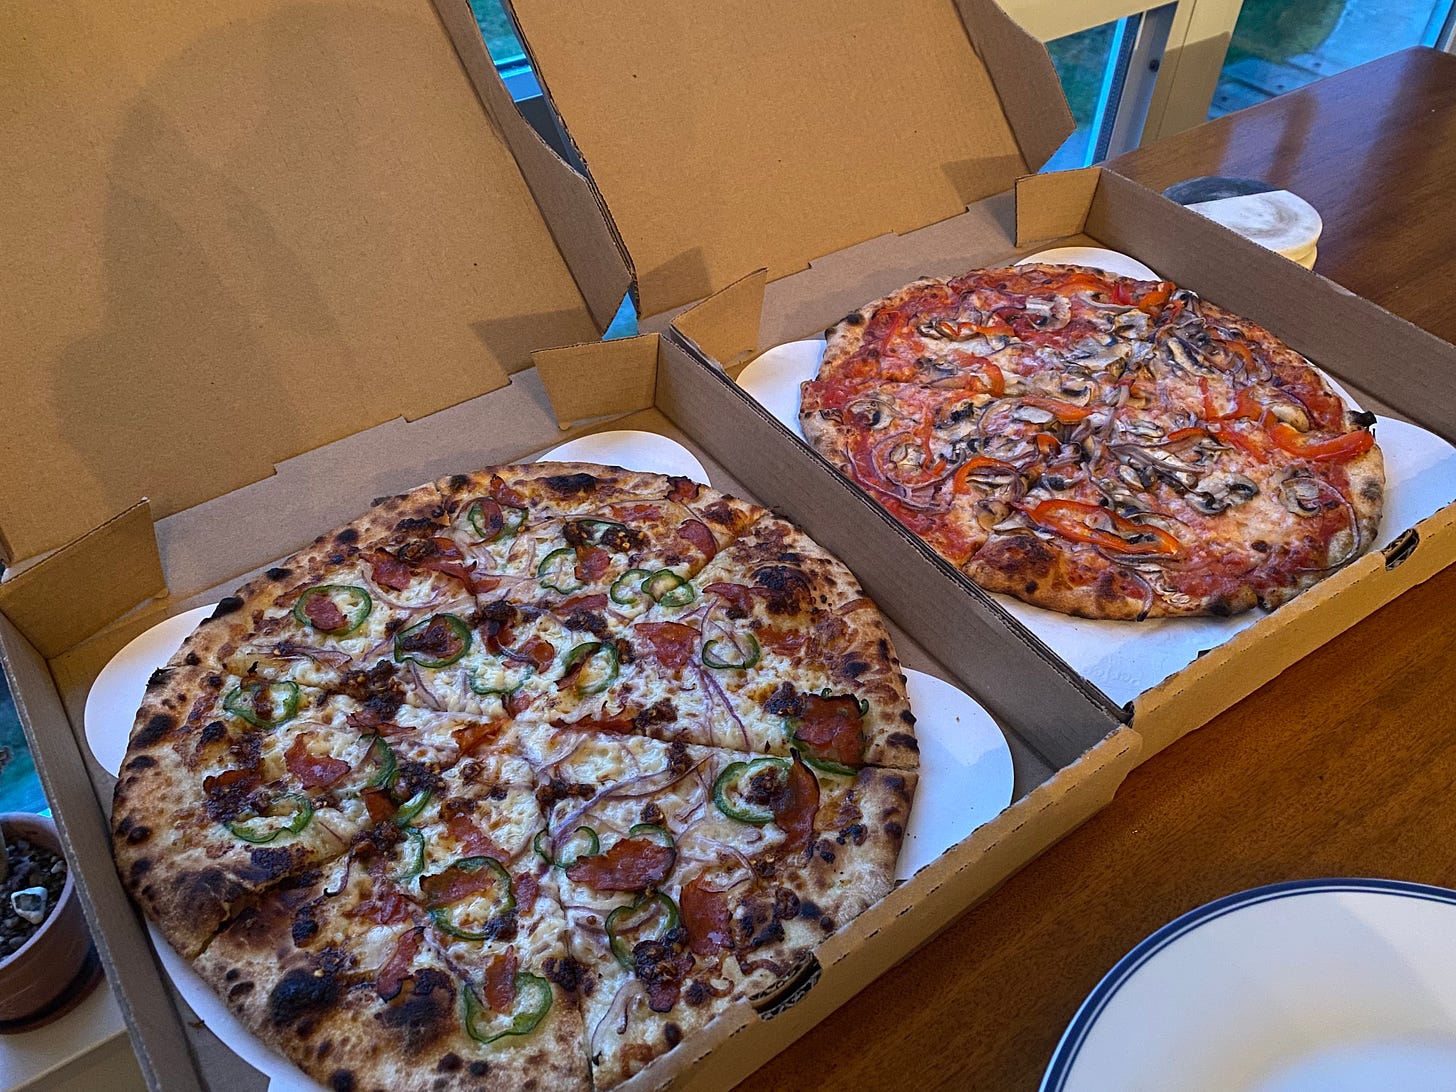 Two open cardboard pizza boxes beside each other, each with a thin-crust pizza inside. One has a sauce-free base and is covered with cheese, jalapeño, red onion, and torn slices of pepperoni. The other is a classic red sauce with mushrooms, red onion, cheese, and red peppers.